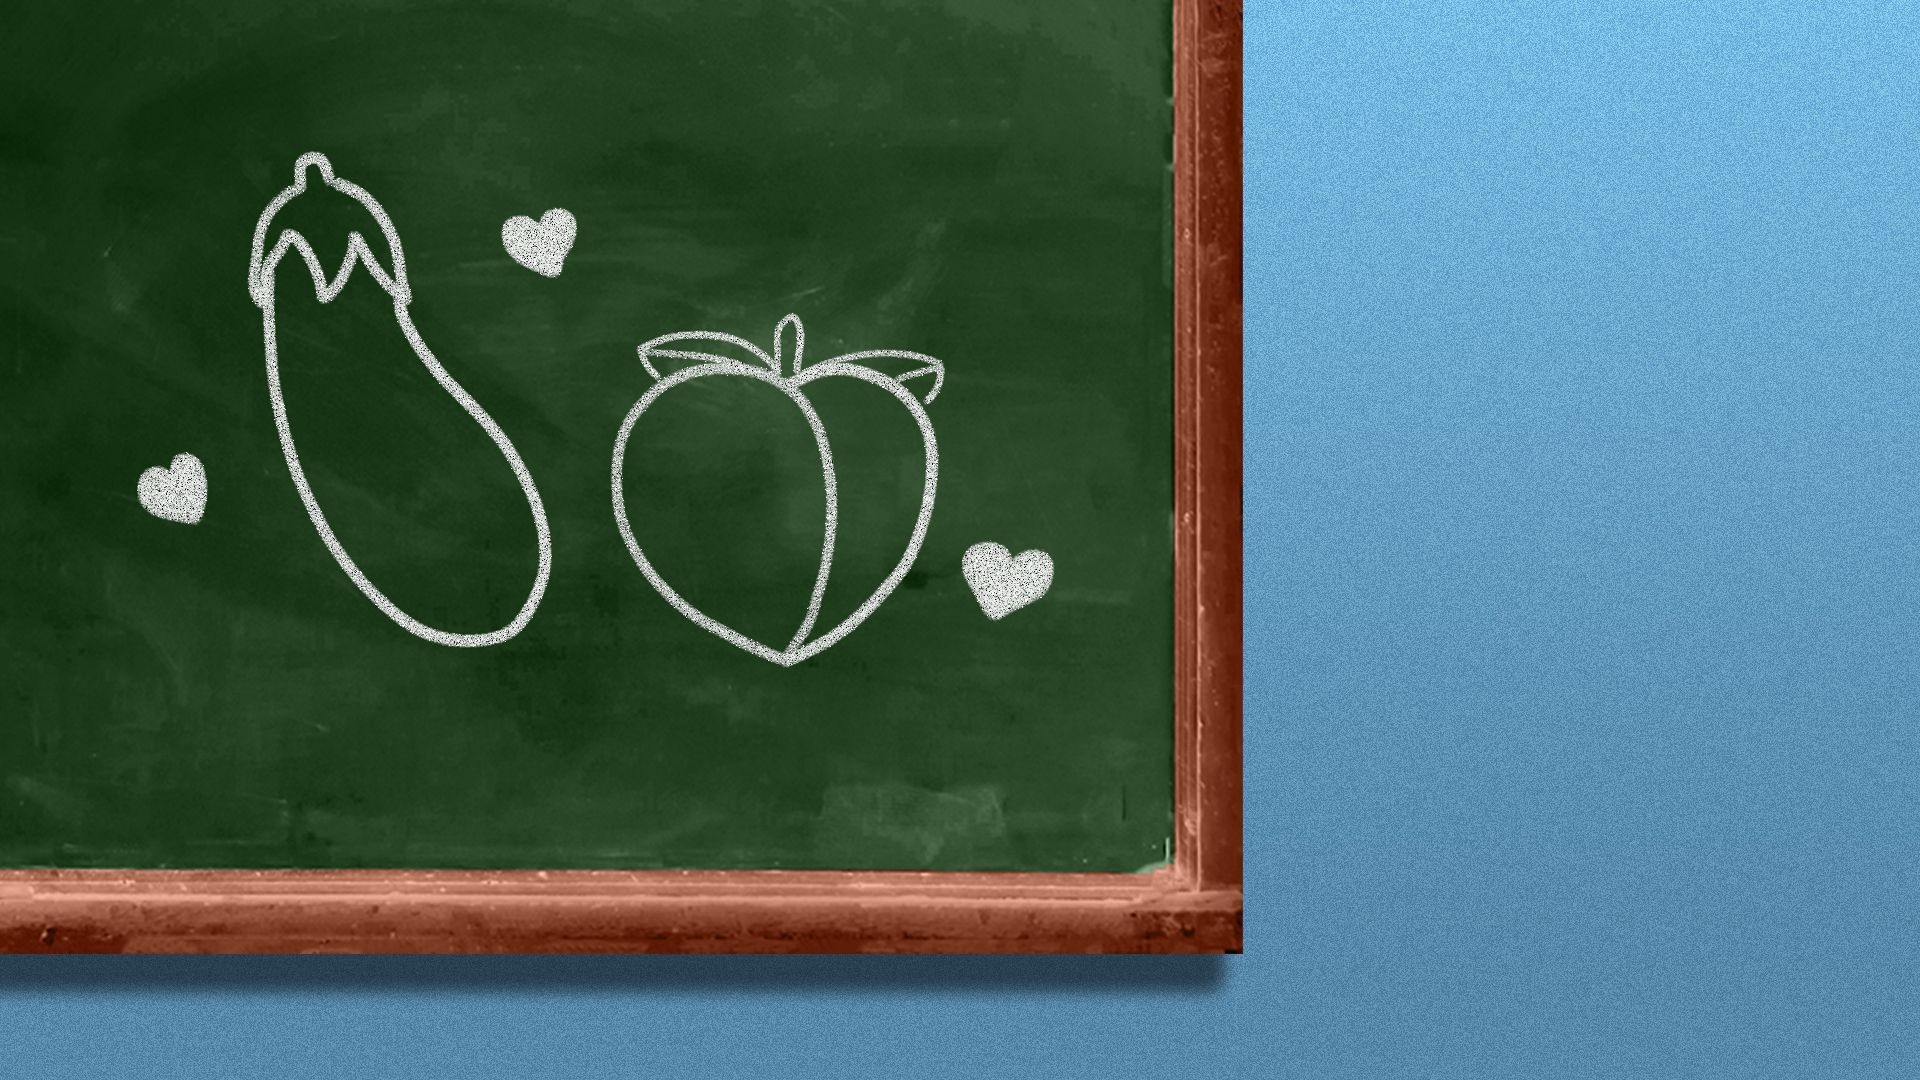 Illustration of an eggplant and peach drawn on a chalkboard.